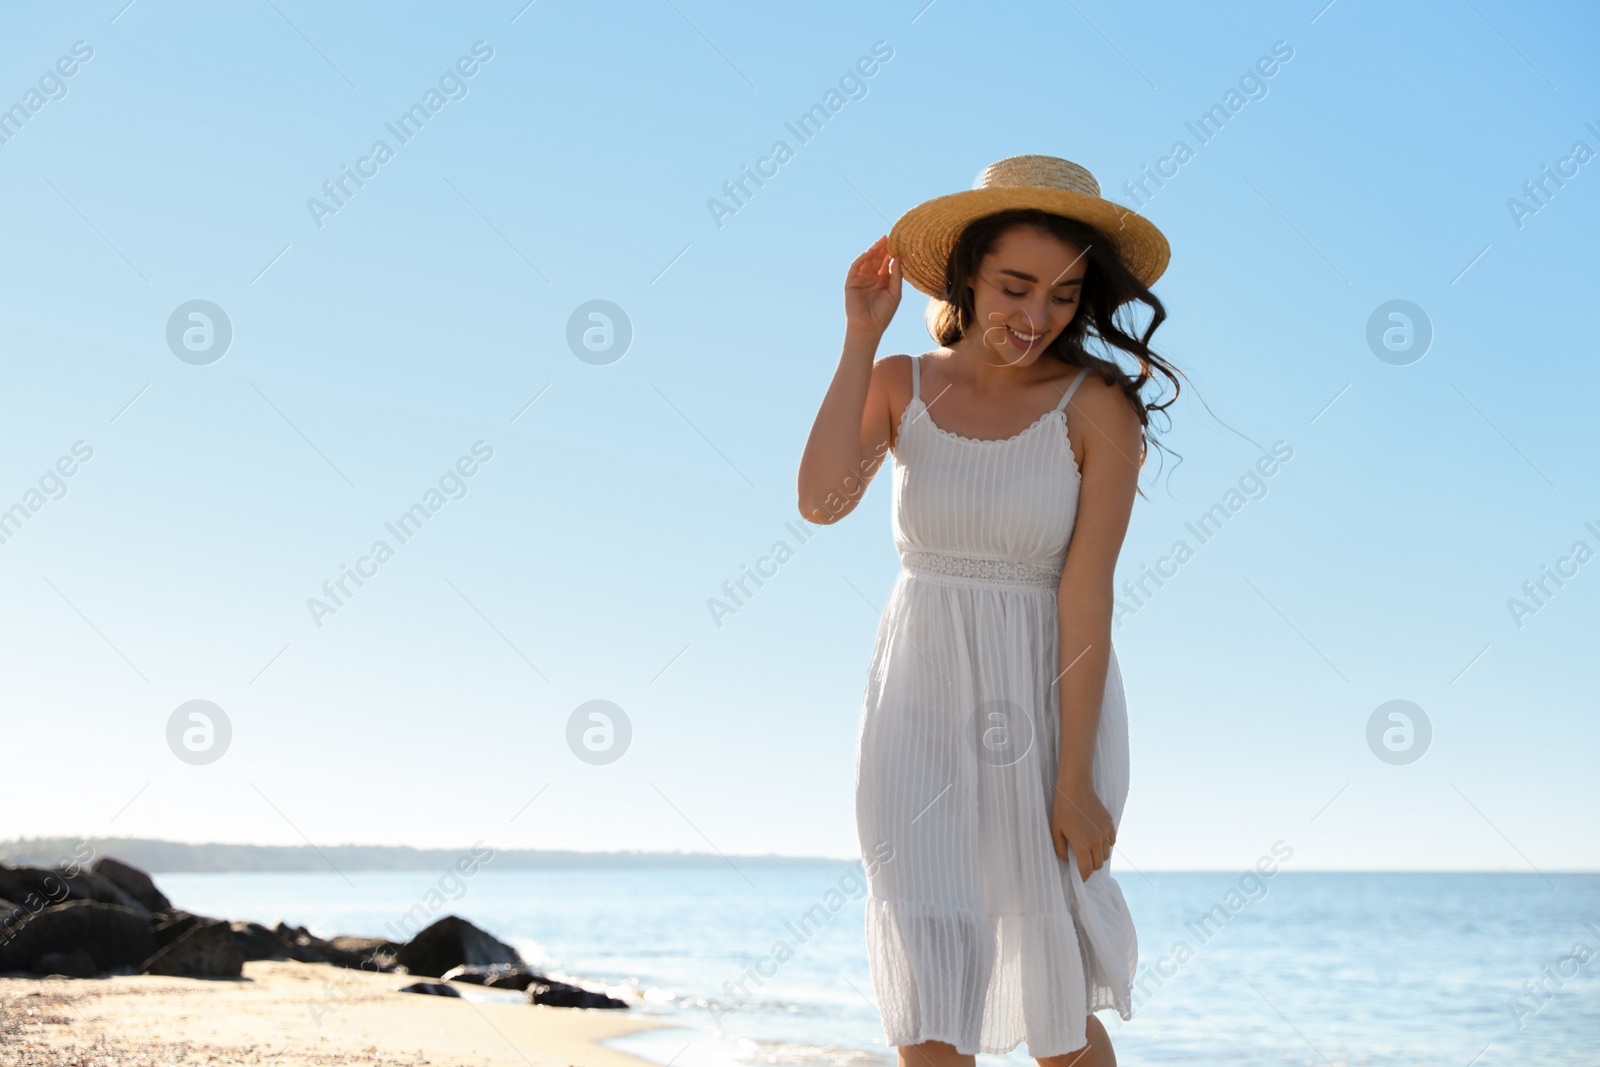 Photo of Happy young woman with hat on beach near sea. Space for text